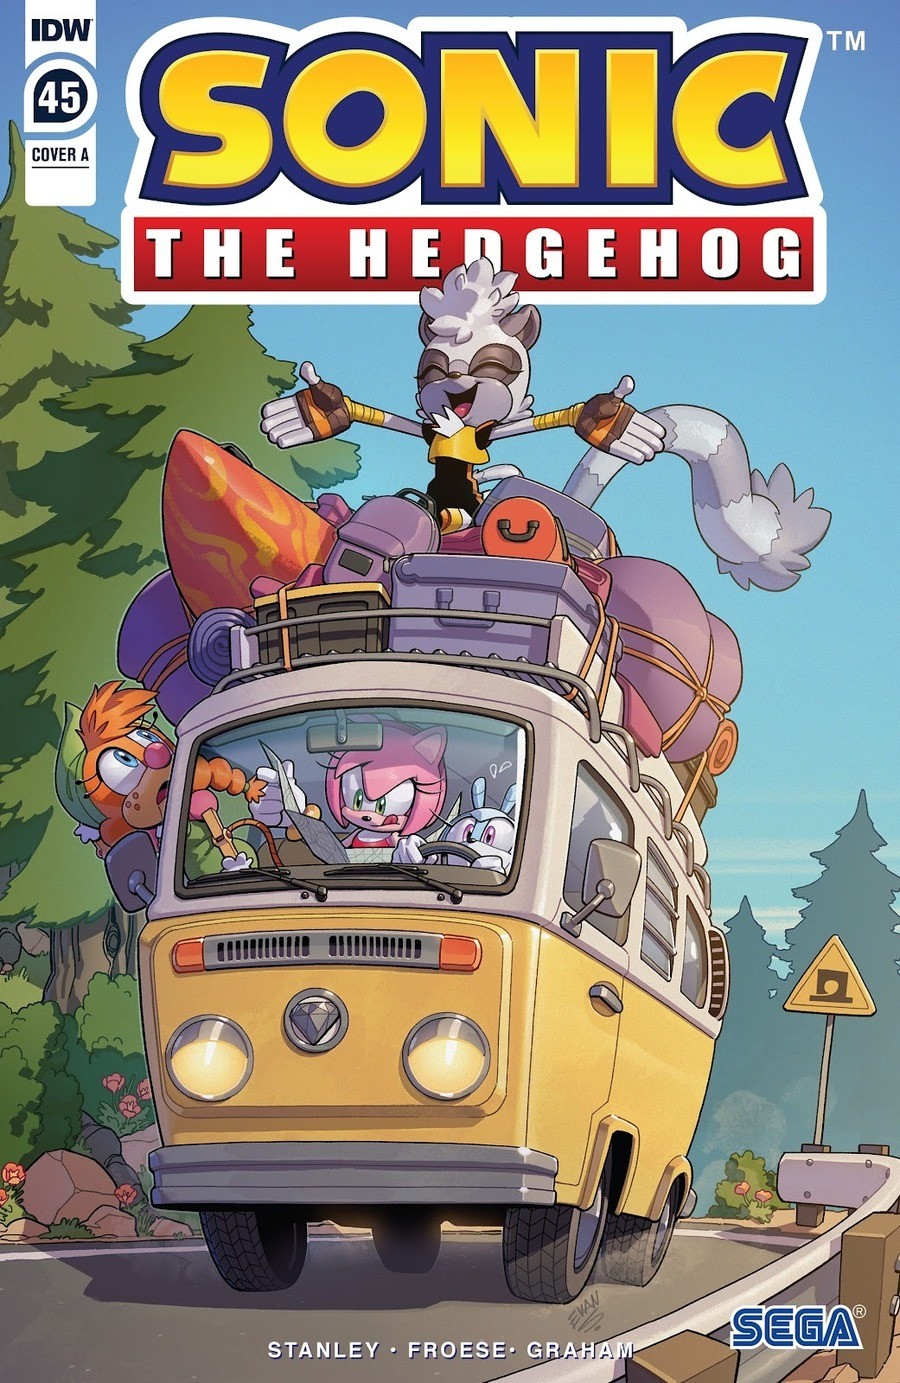 Sonic IDW #45. A road trip, you say? Sounds fun! What's the worst that could happen? join list: SonicIDW (93 subs)Mention History. you should post the bonus pics more, they're nice